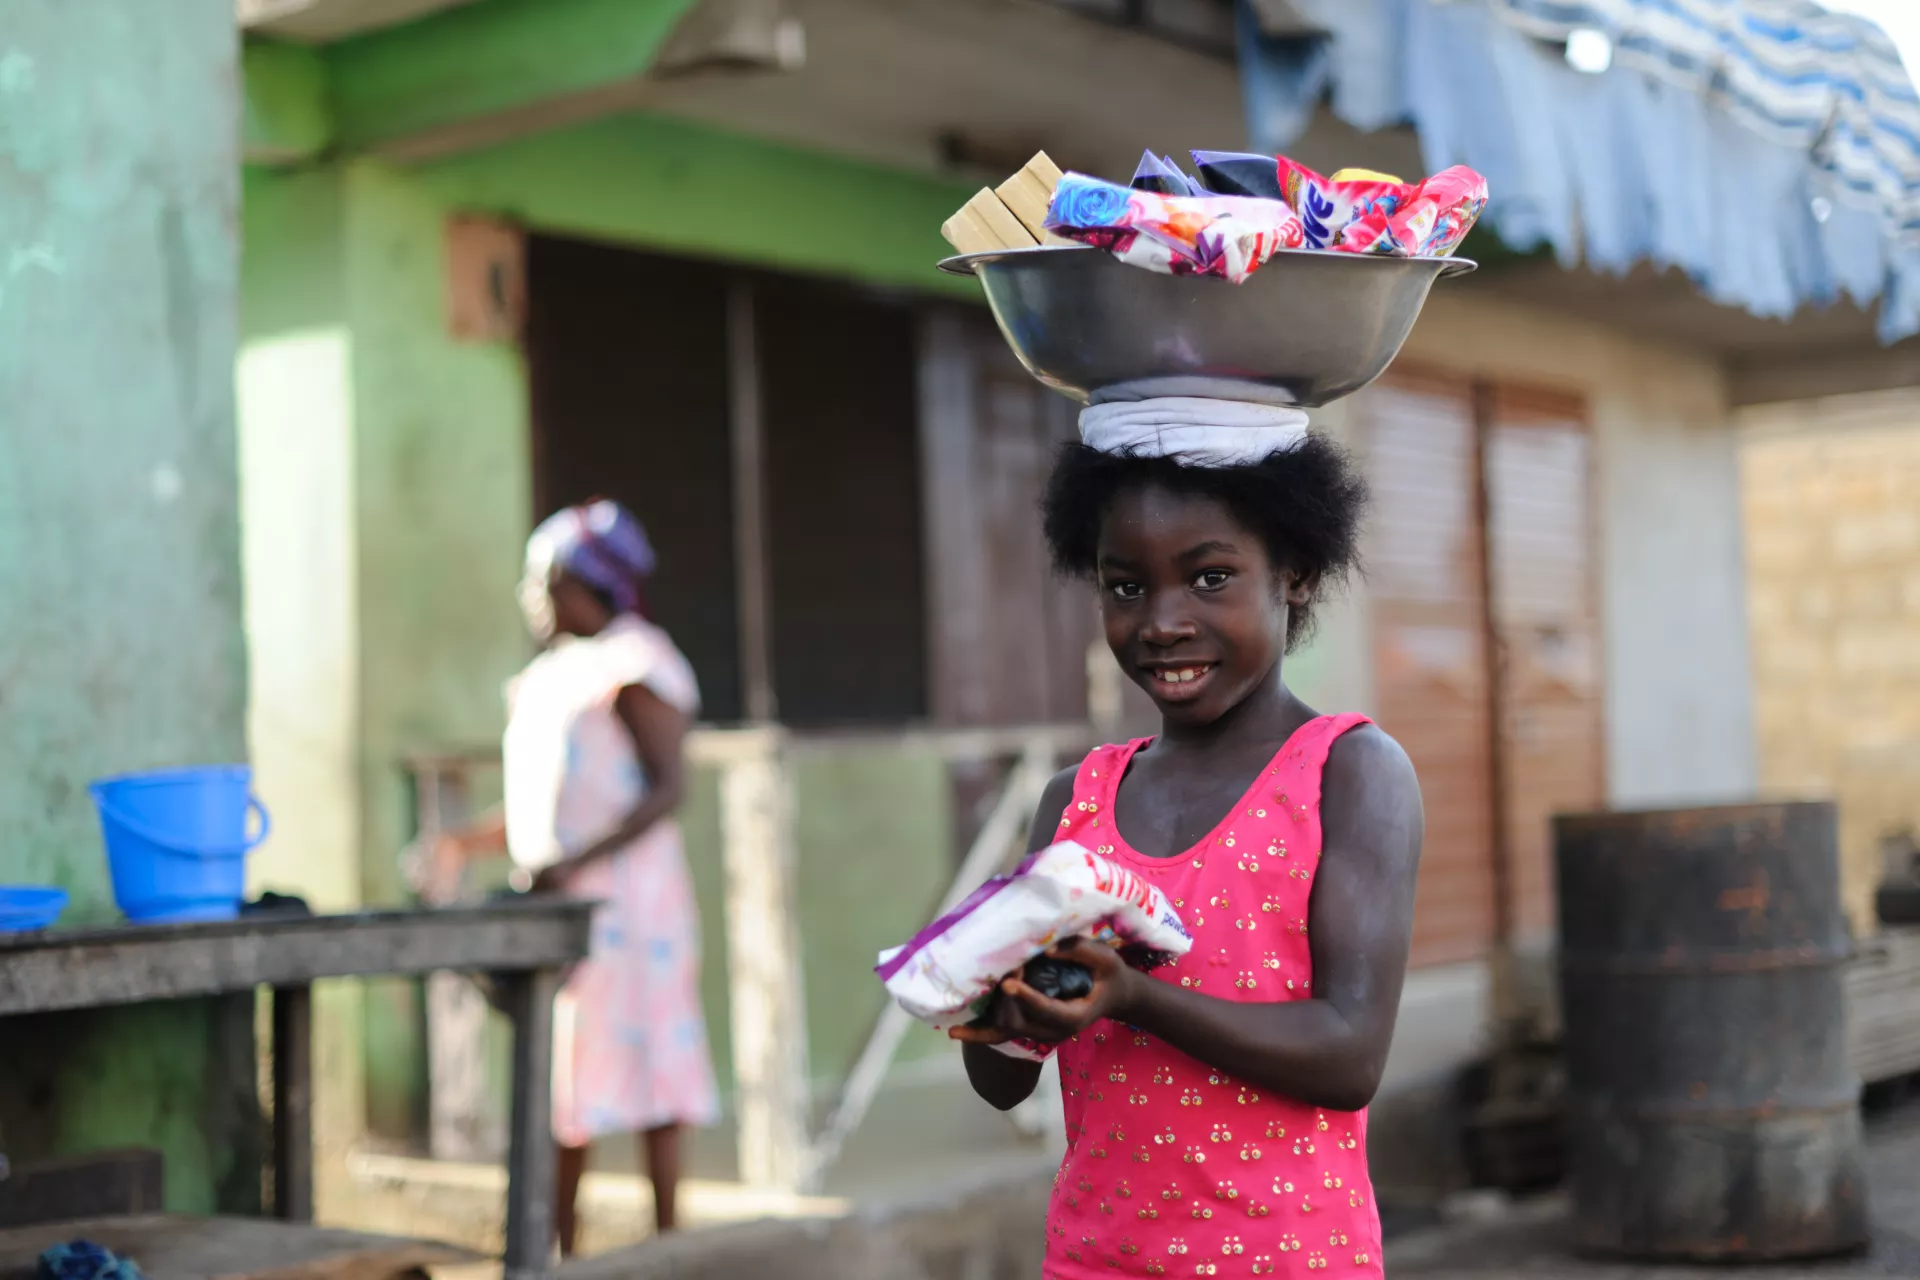 A girl selling soap and washing powder out of a basin carried on her head in town of Elmina in the Central Region of Ghana.